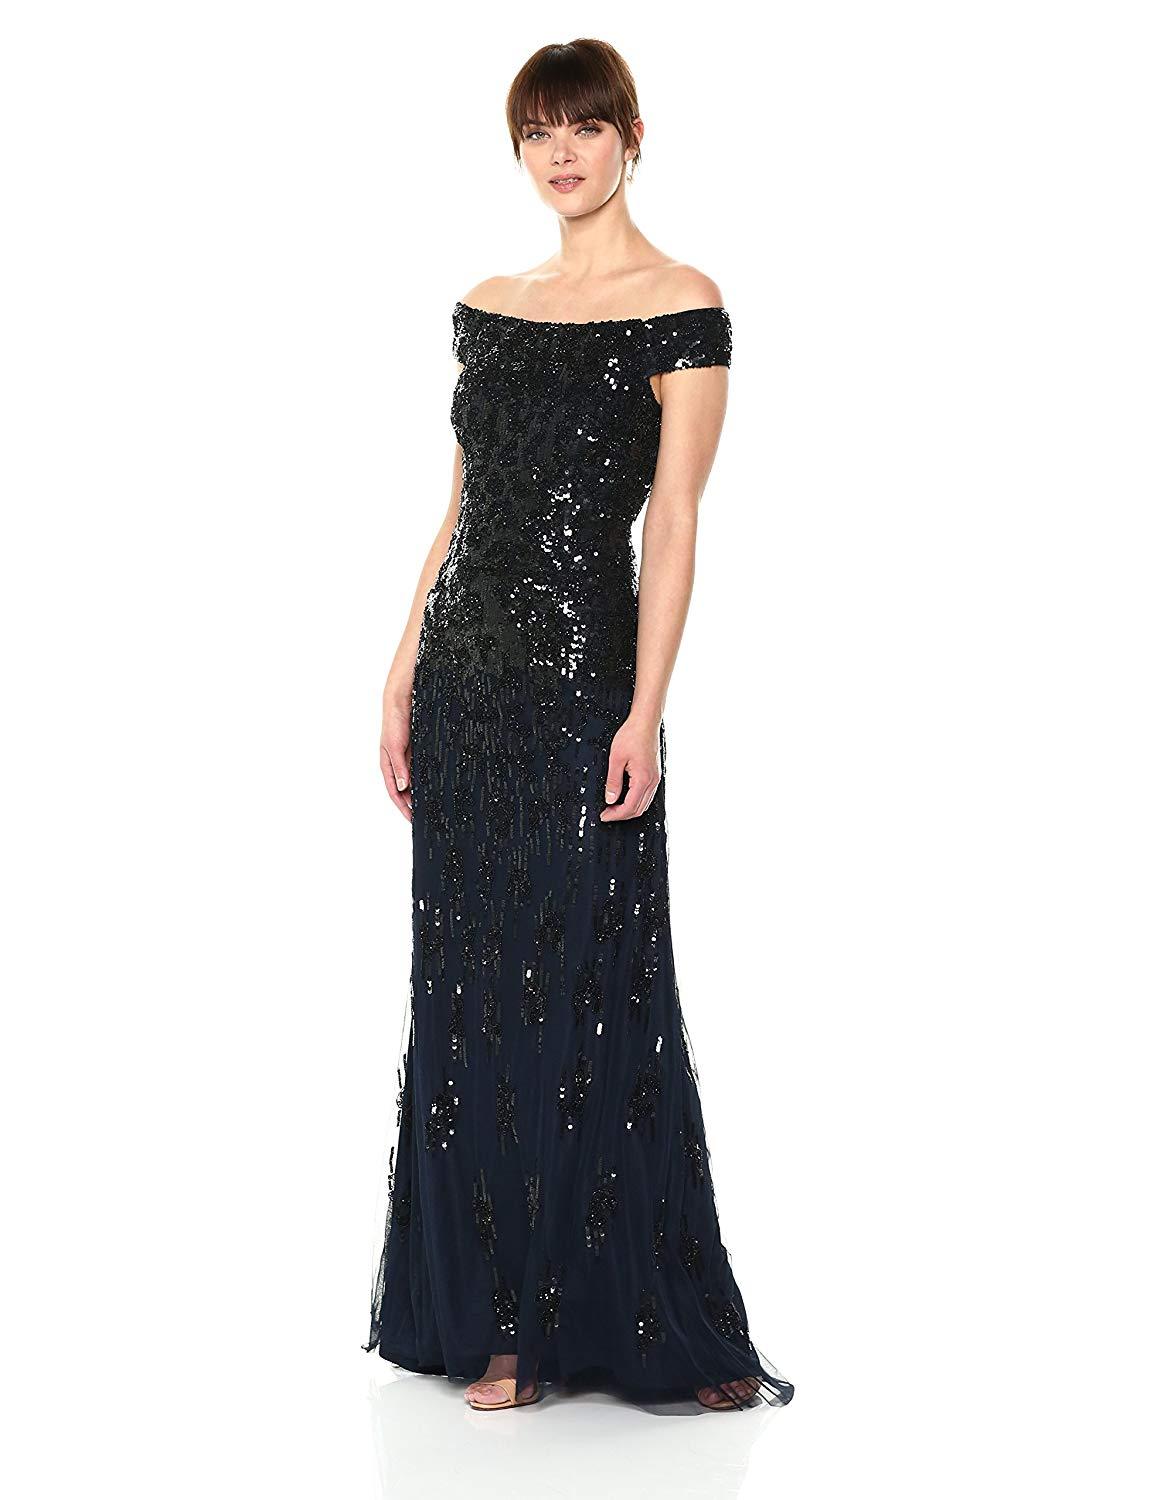 Adrianna Papell - AP1E202441 Embellished Off-Shoulder Evening Gown In Blue and Black